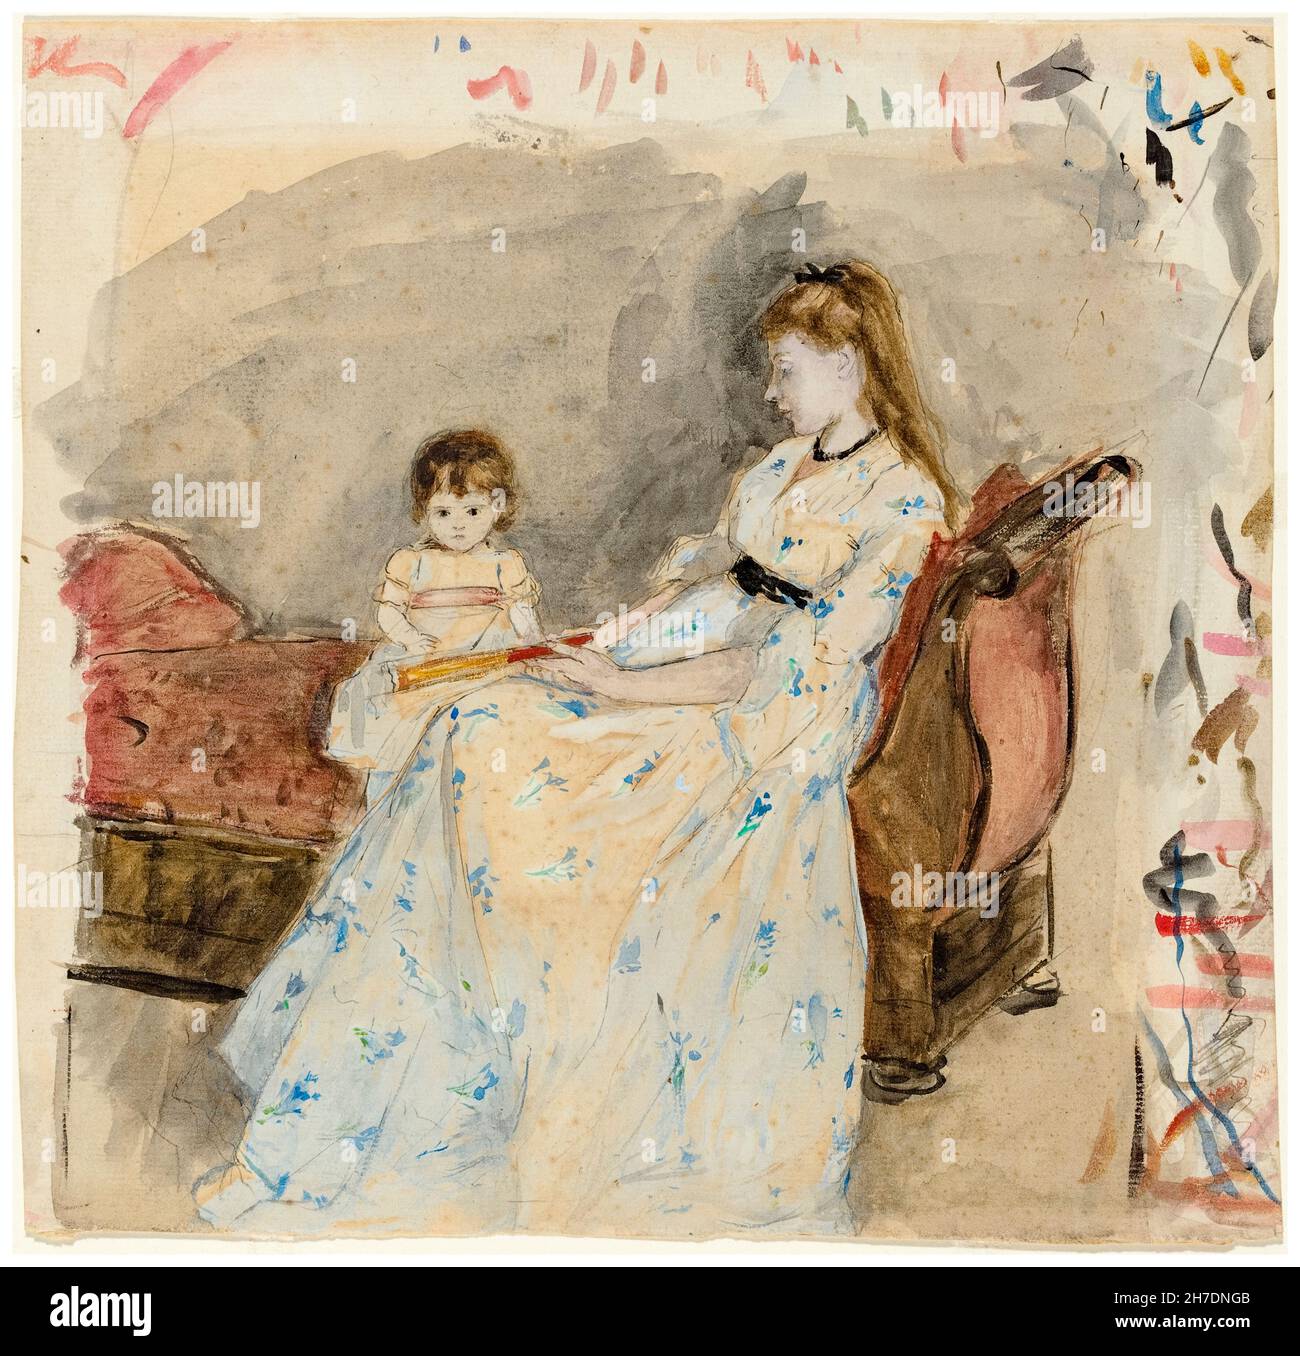 Berthe Morisot, The Artist's Sister Edma with Her Daughter Jeanne, portrait drawing, 1872 Stock Photo